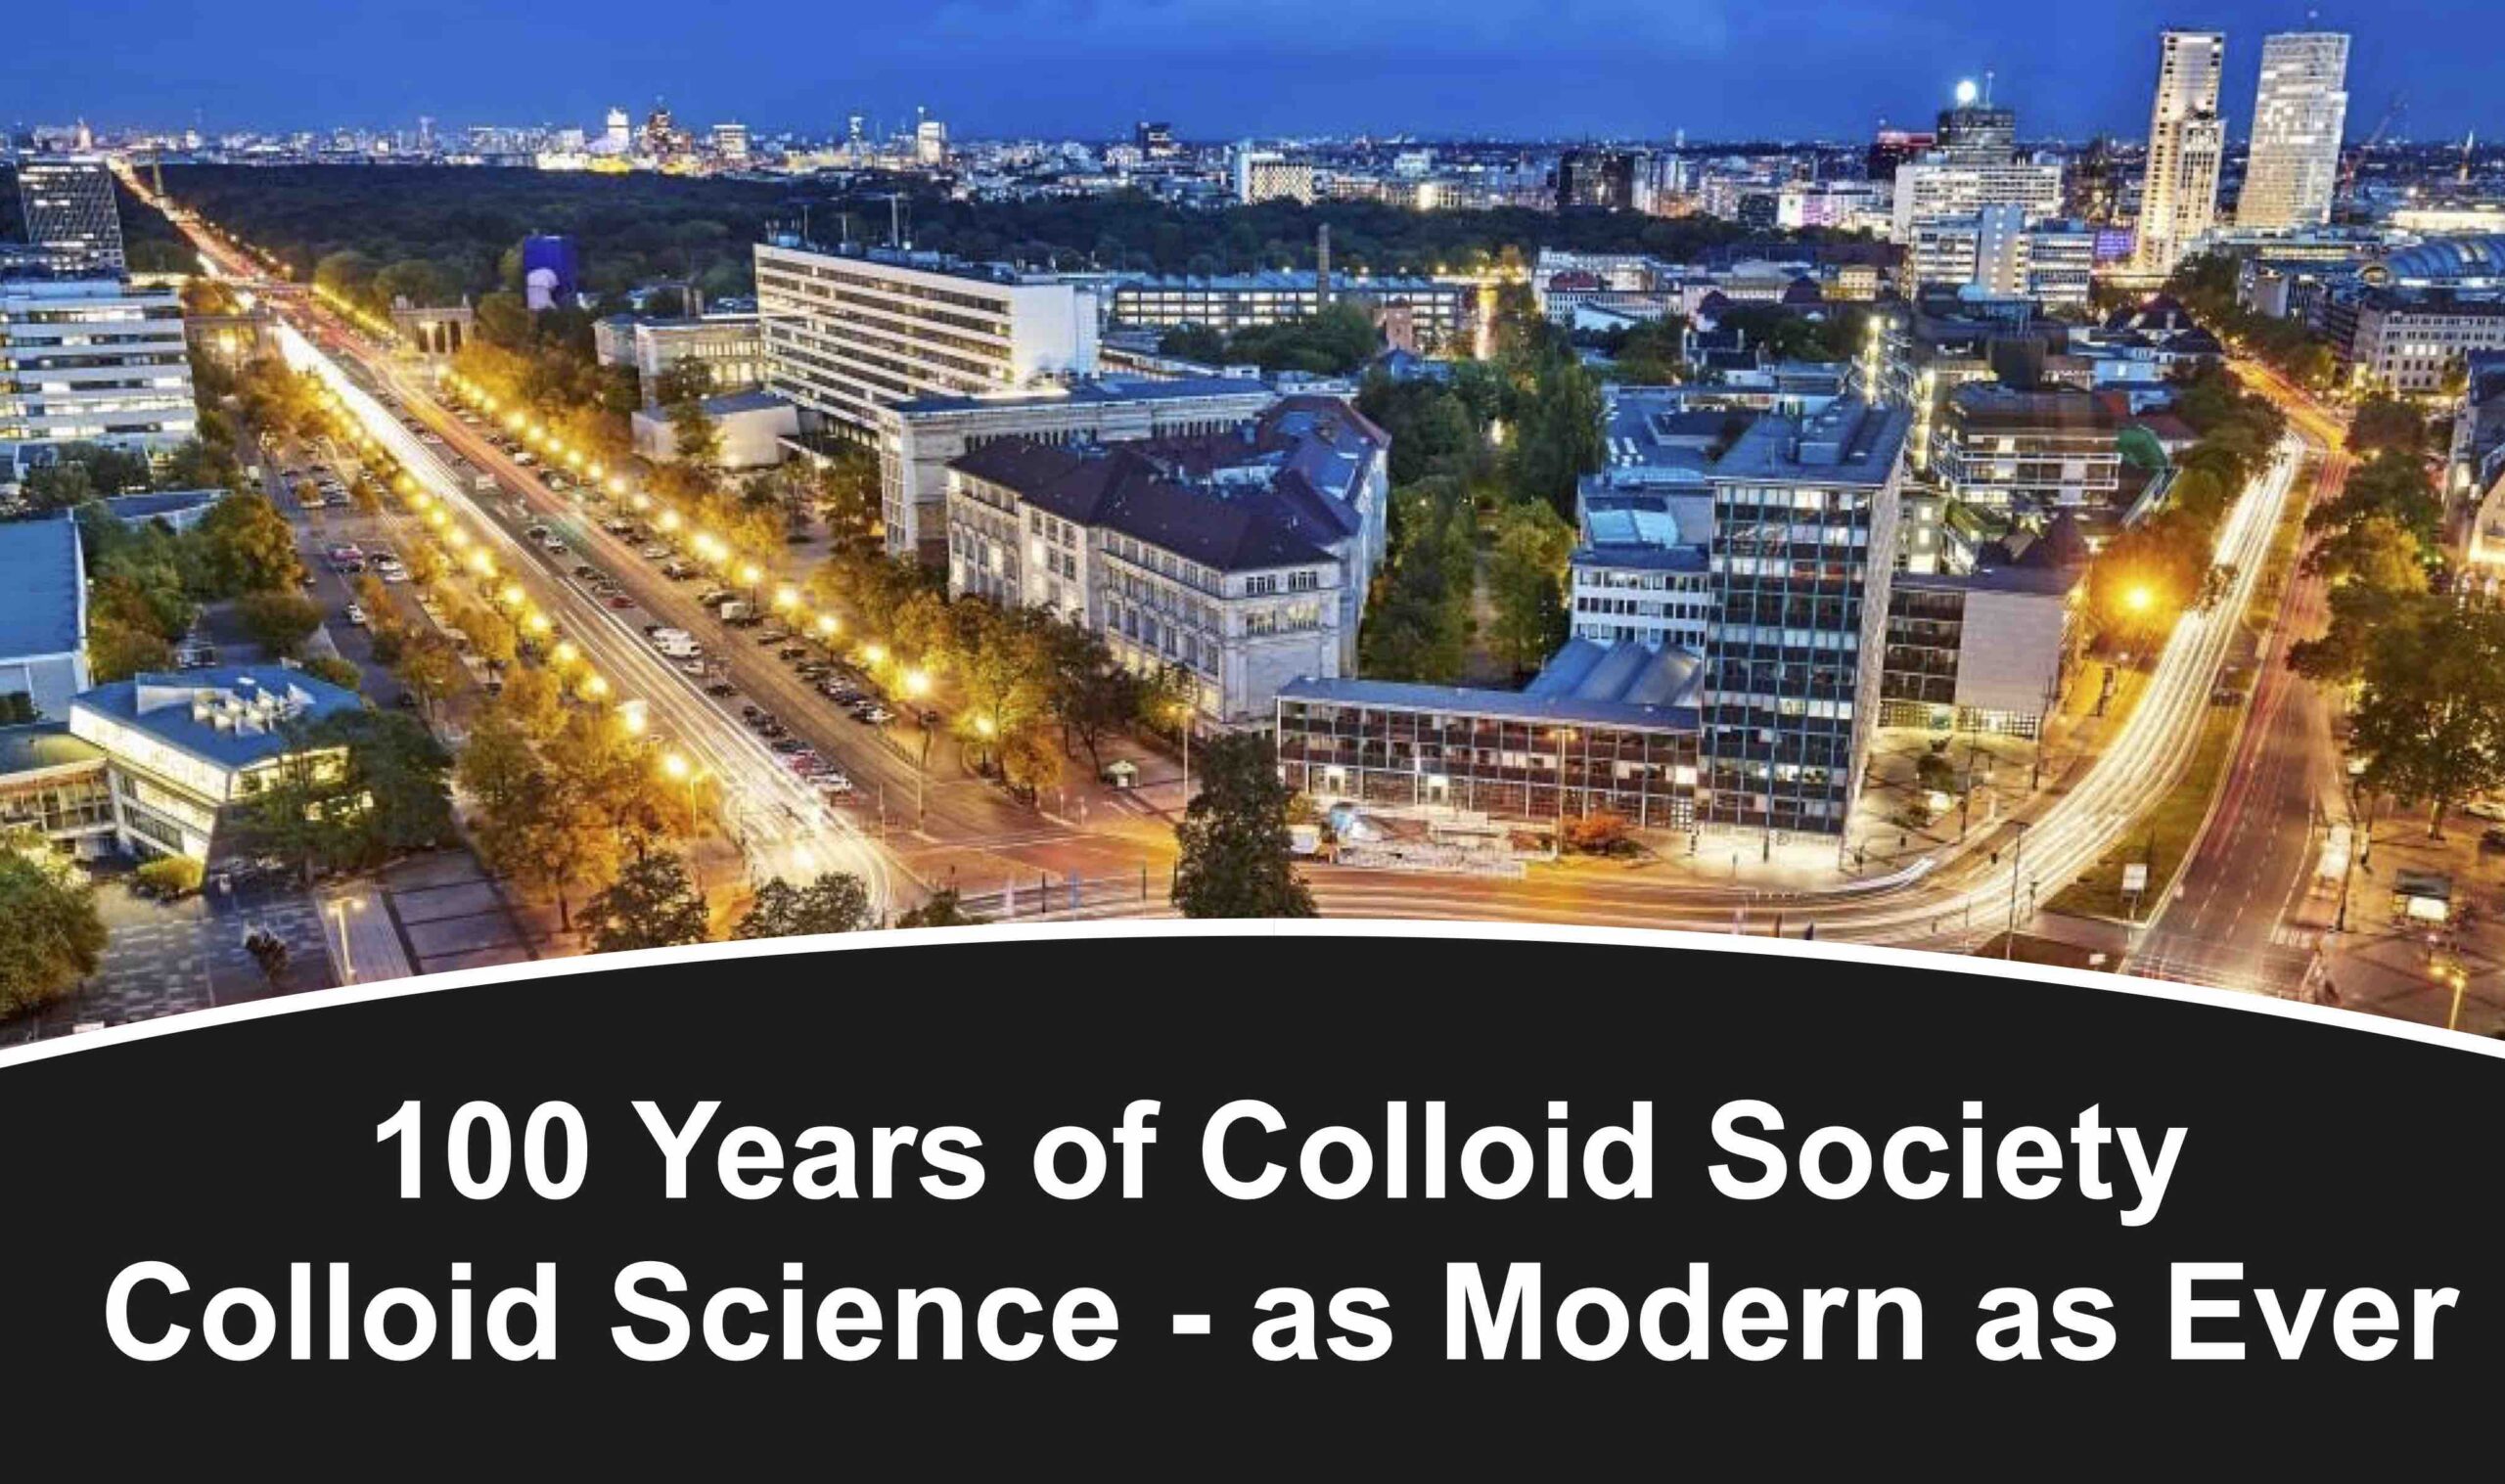 100 years of colloid society - colloid science as modern as ever